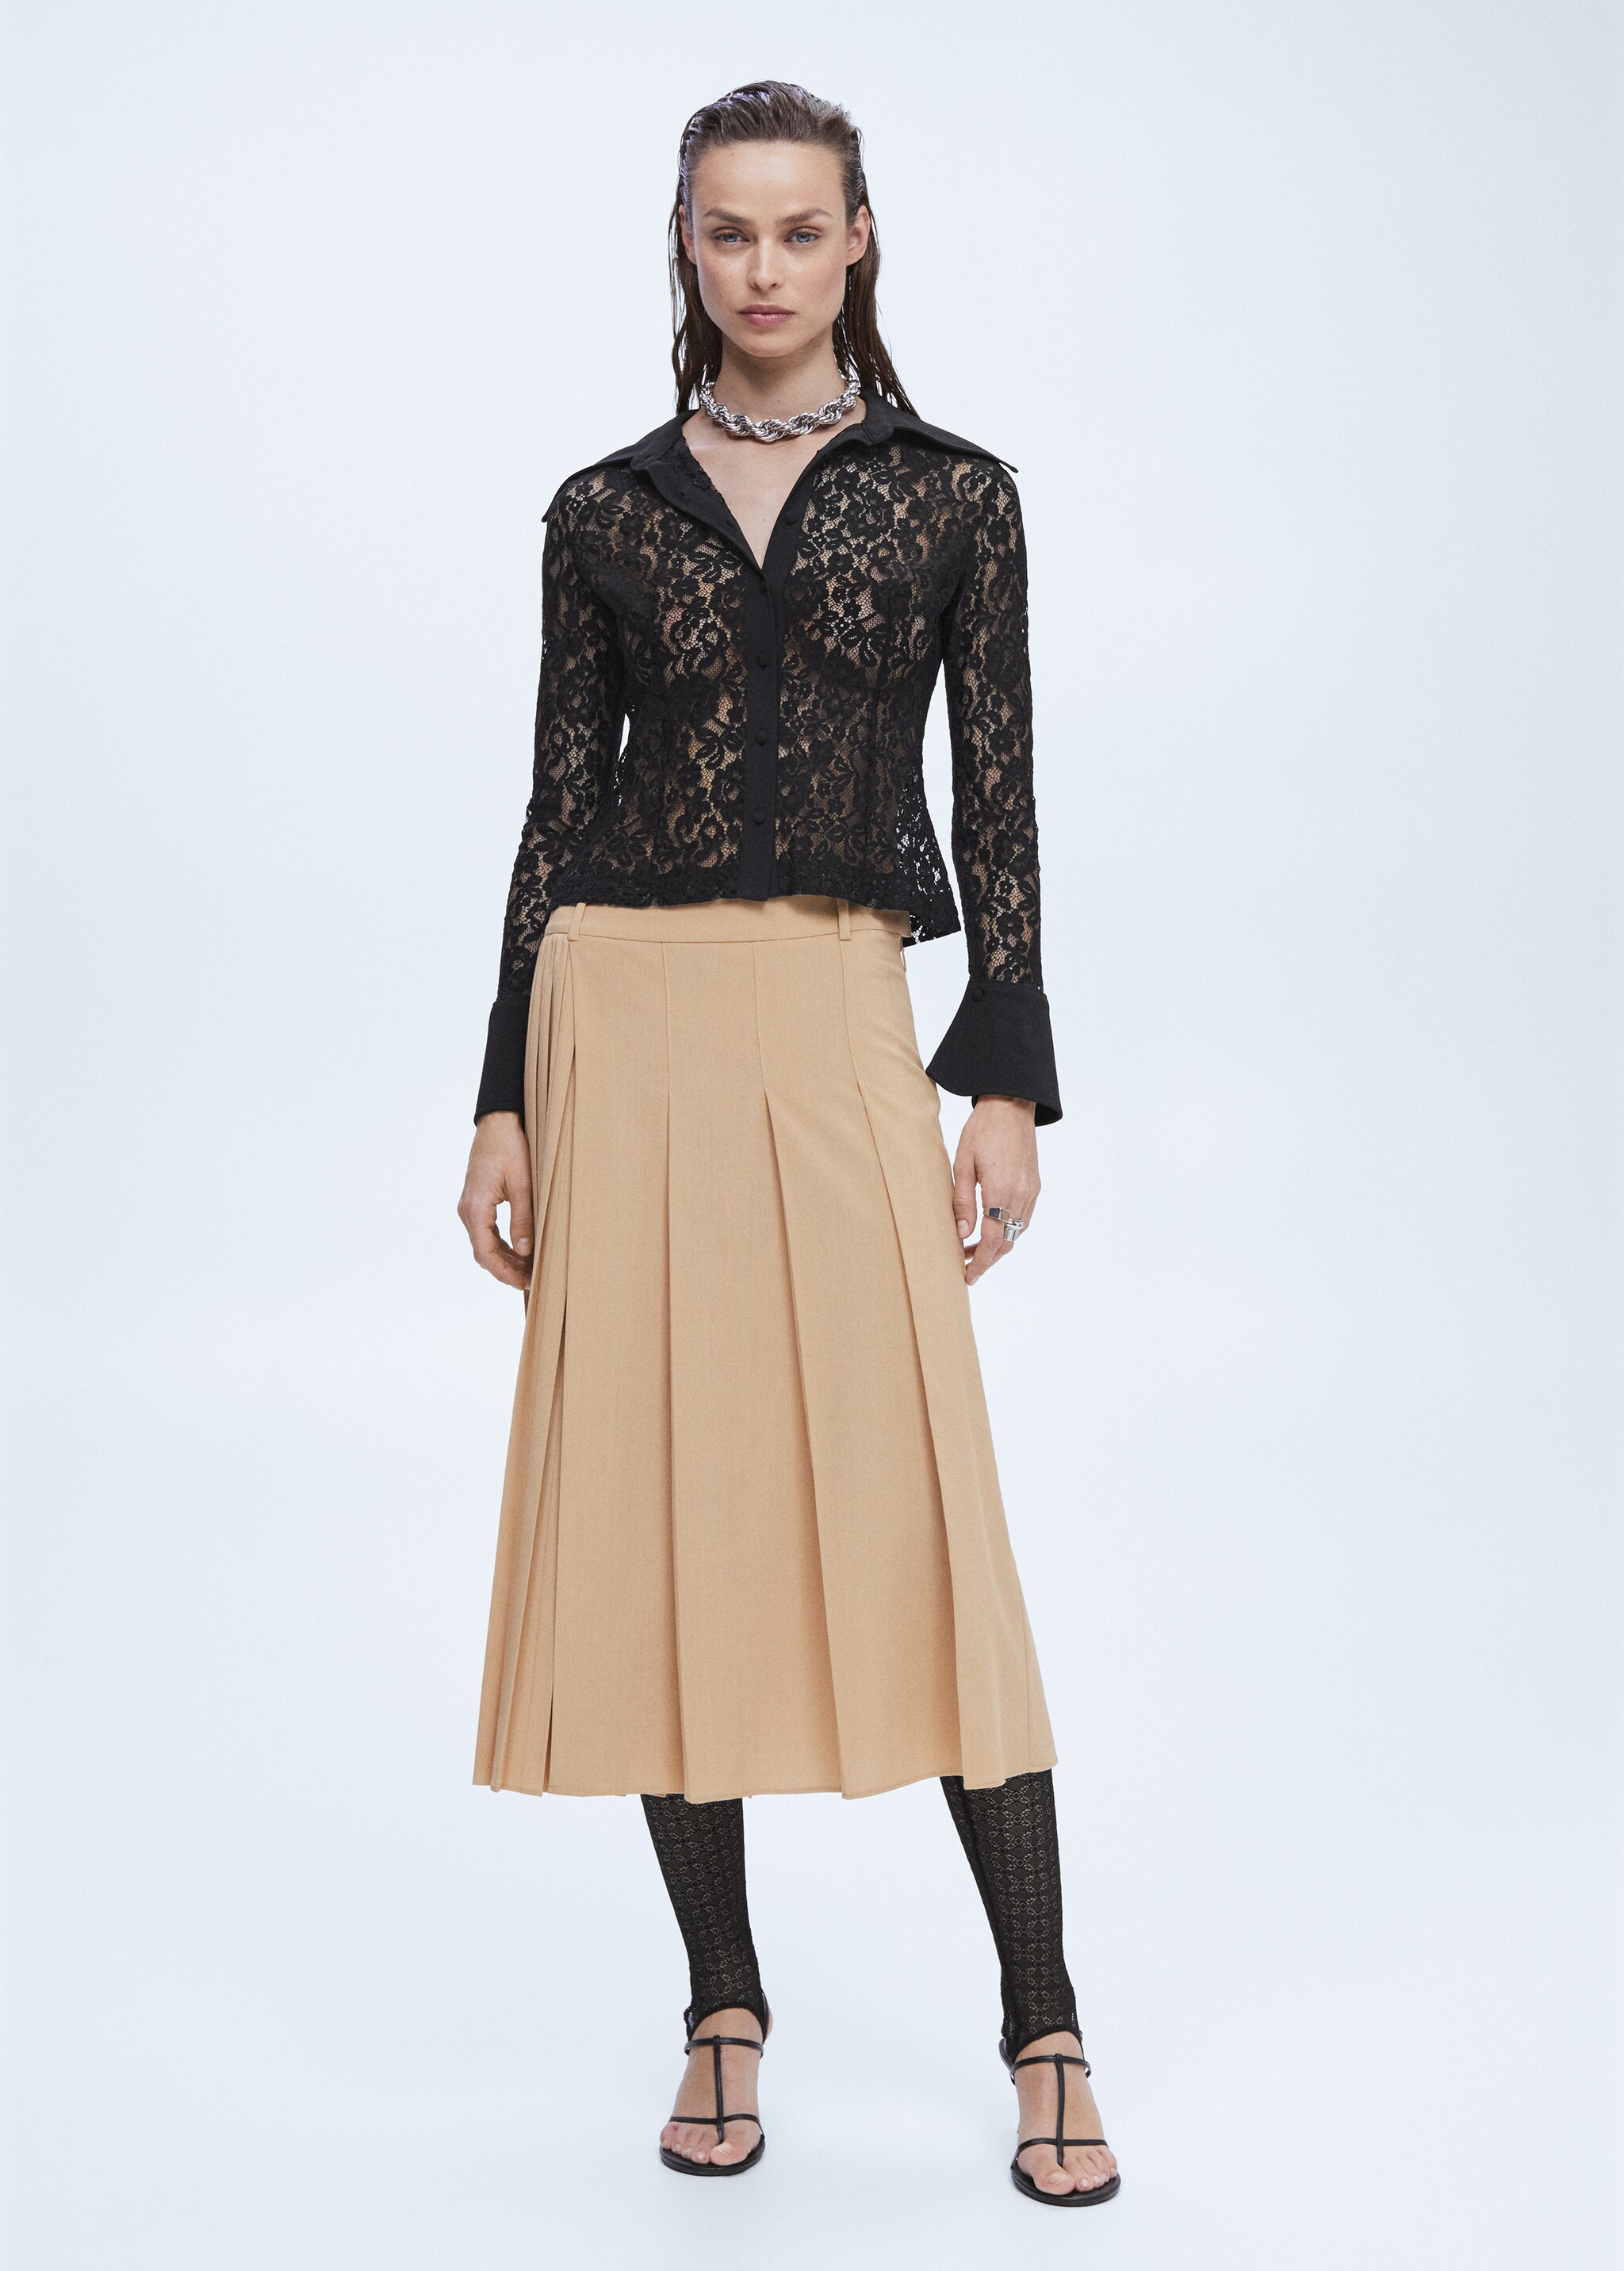 Lace blouse with flared sleeves - General plane